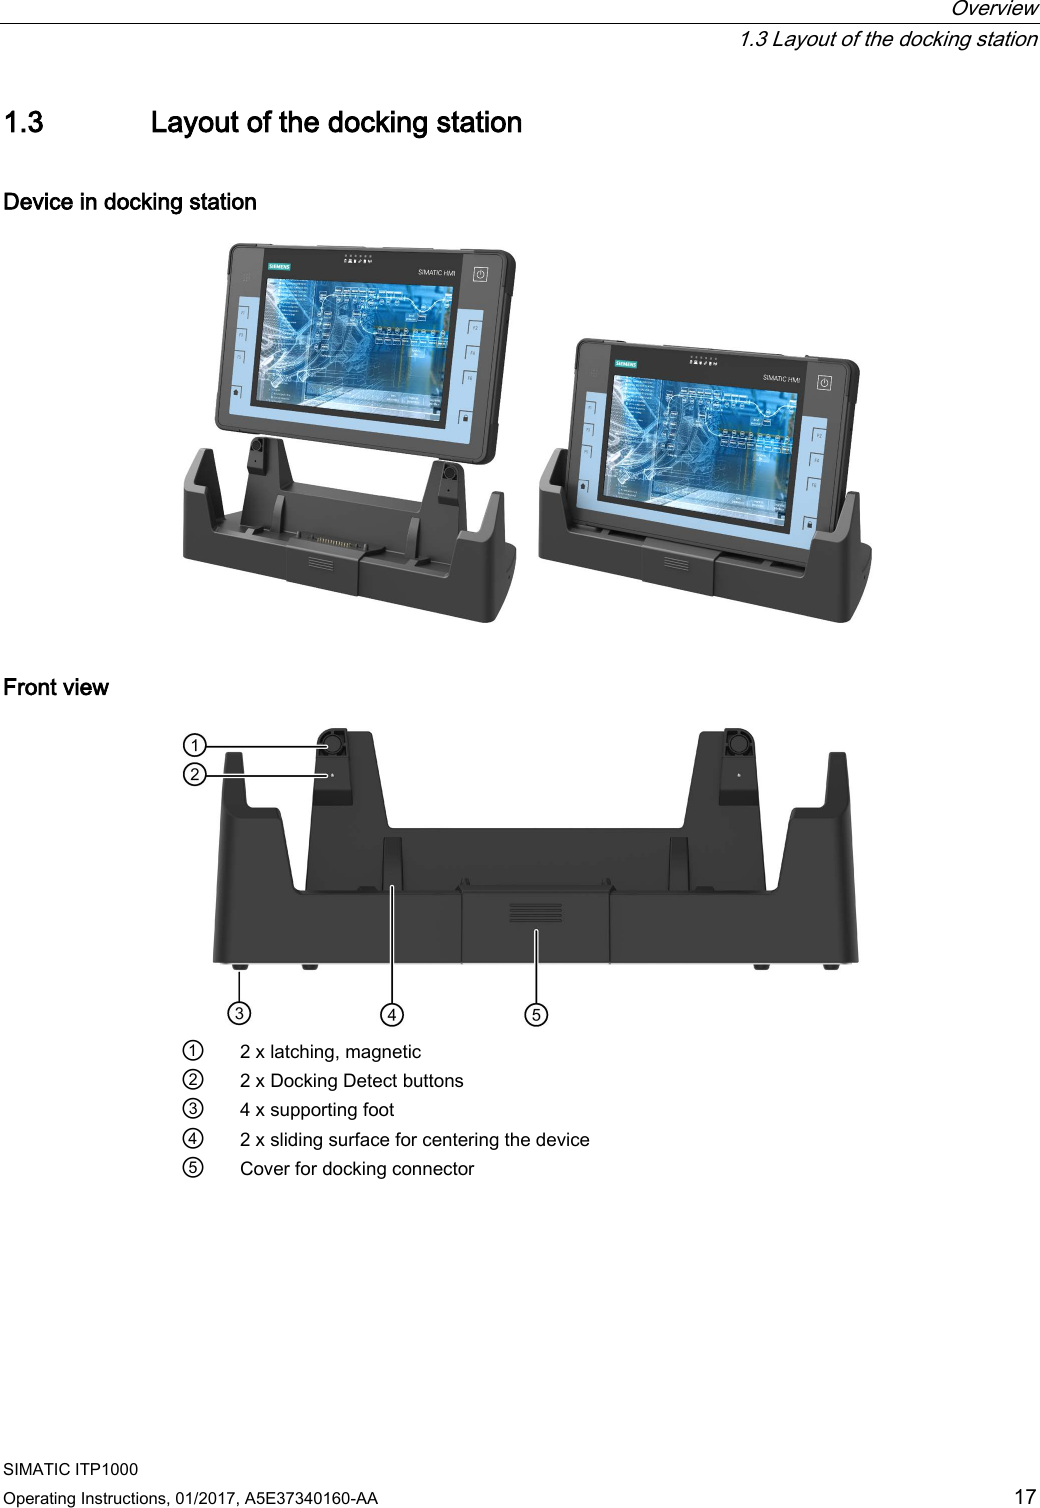  Overview  1.3 Layout of the docking station SIMATIC ITP1000 Operating Instructions, 01/2017, A5E37340160-AA  17 1.3 Layout of the docking station Device in docking station  Front view  ① 2 x latching, magnetic ② 2 x Docking Detect buttons ③ 4 x supporting foot ④ 2 x sliding surface for centering the device ⑤ Cover for docking connector 